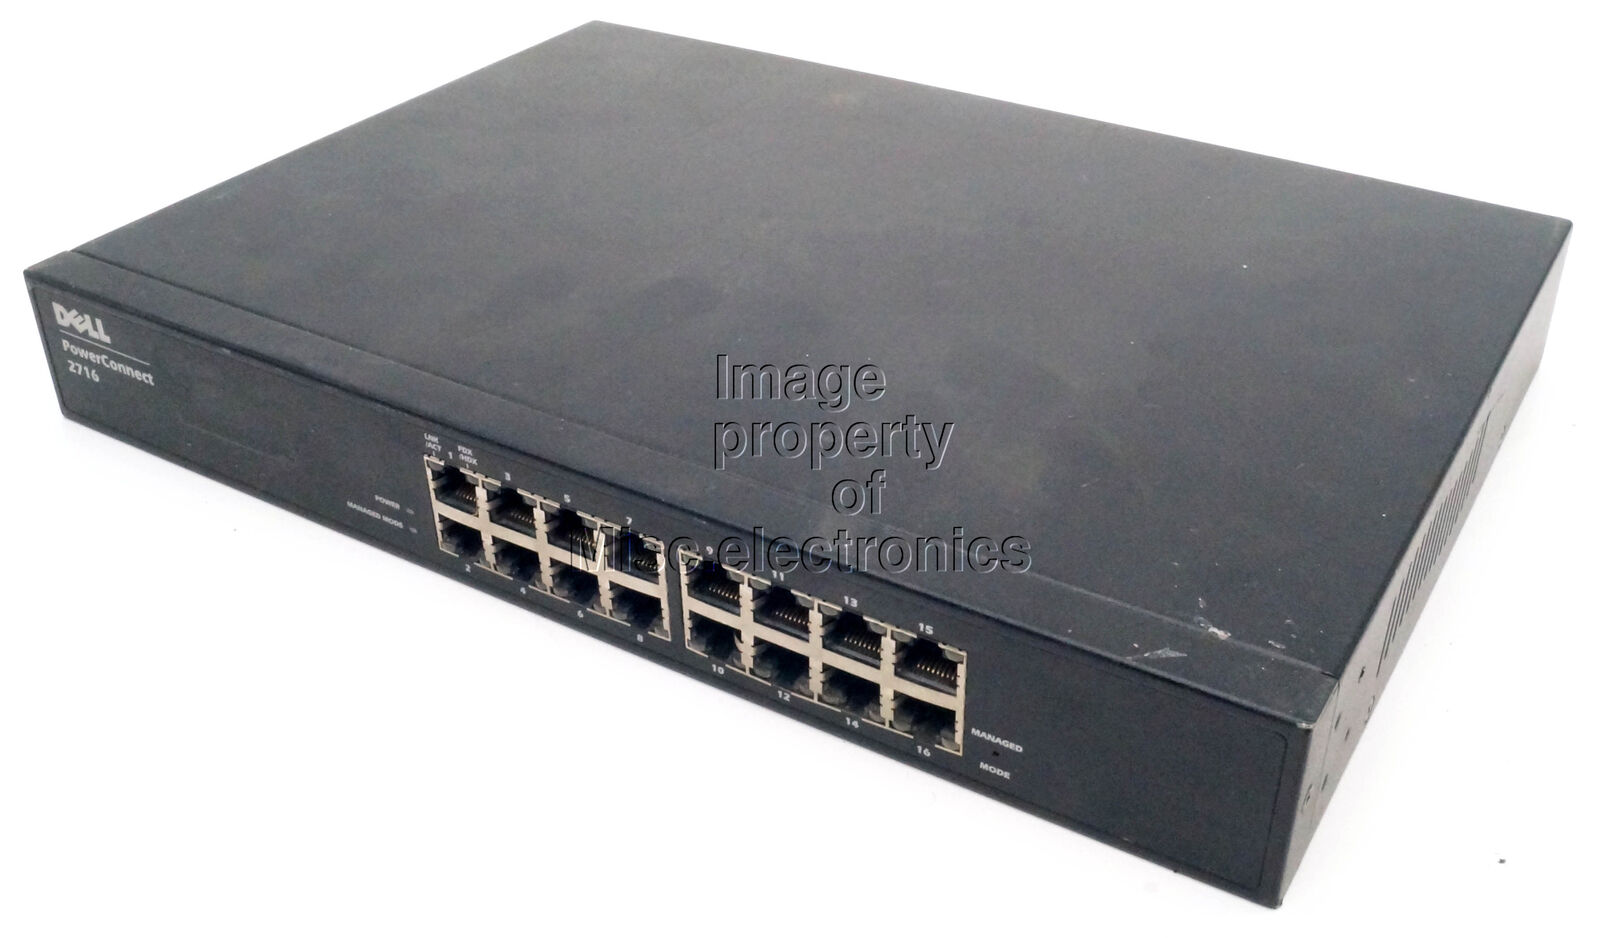 Dell PowerConnect 2716 16-Port 10/100/1000 Gigabit Ethernet Switch  A